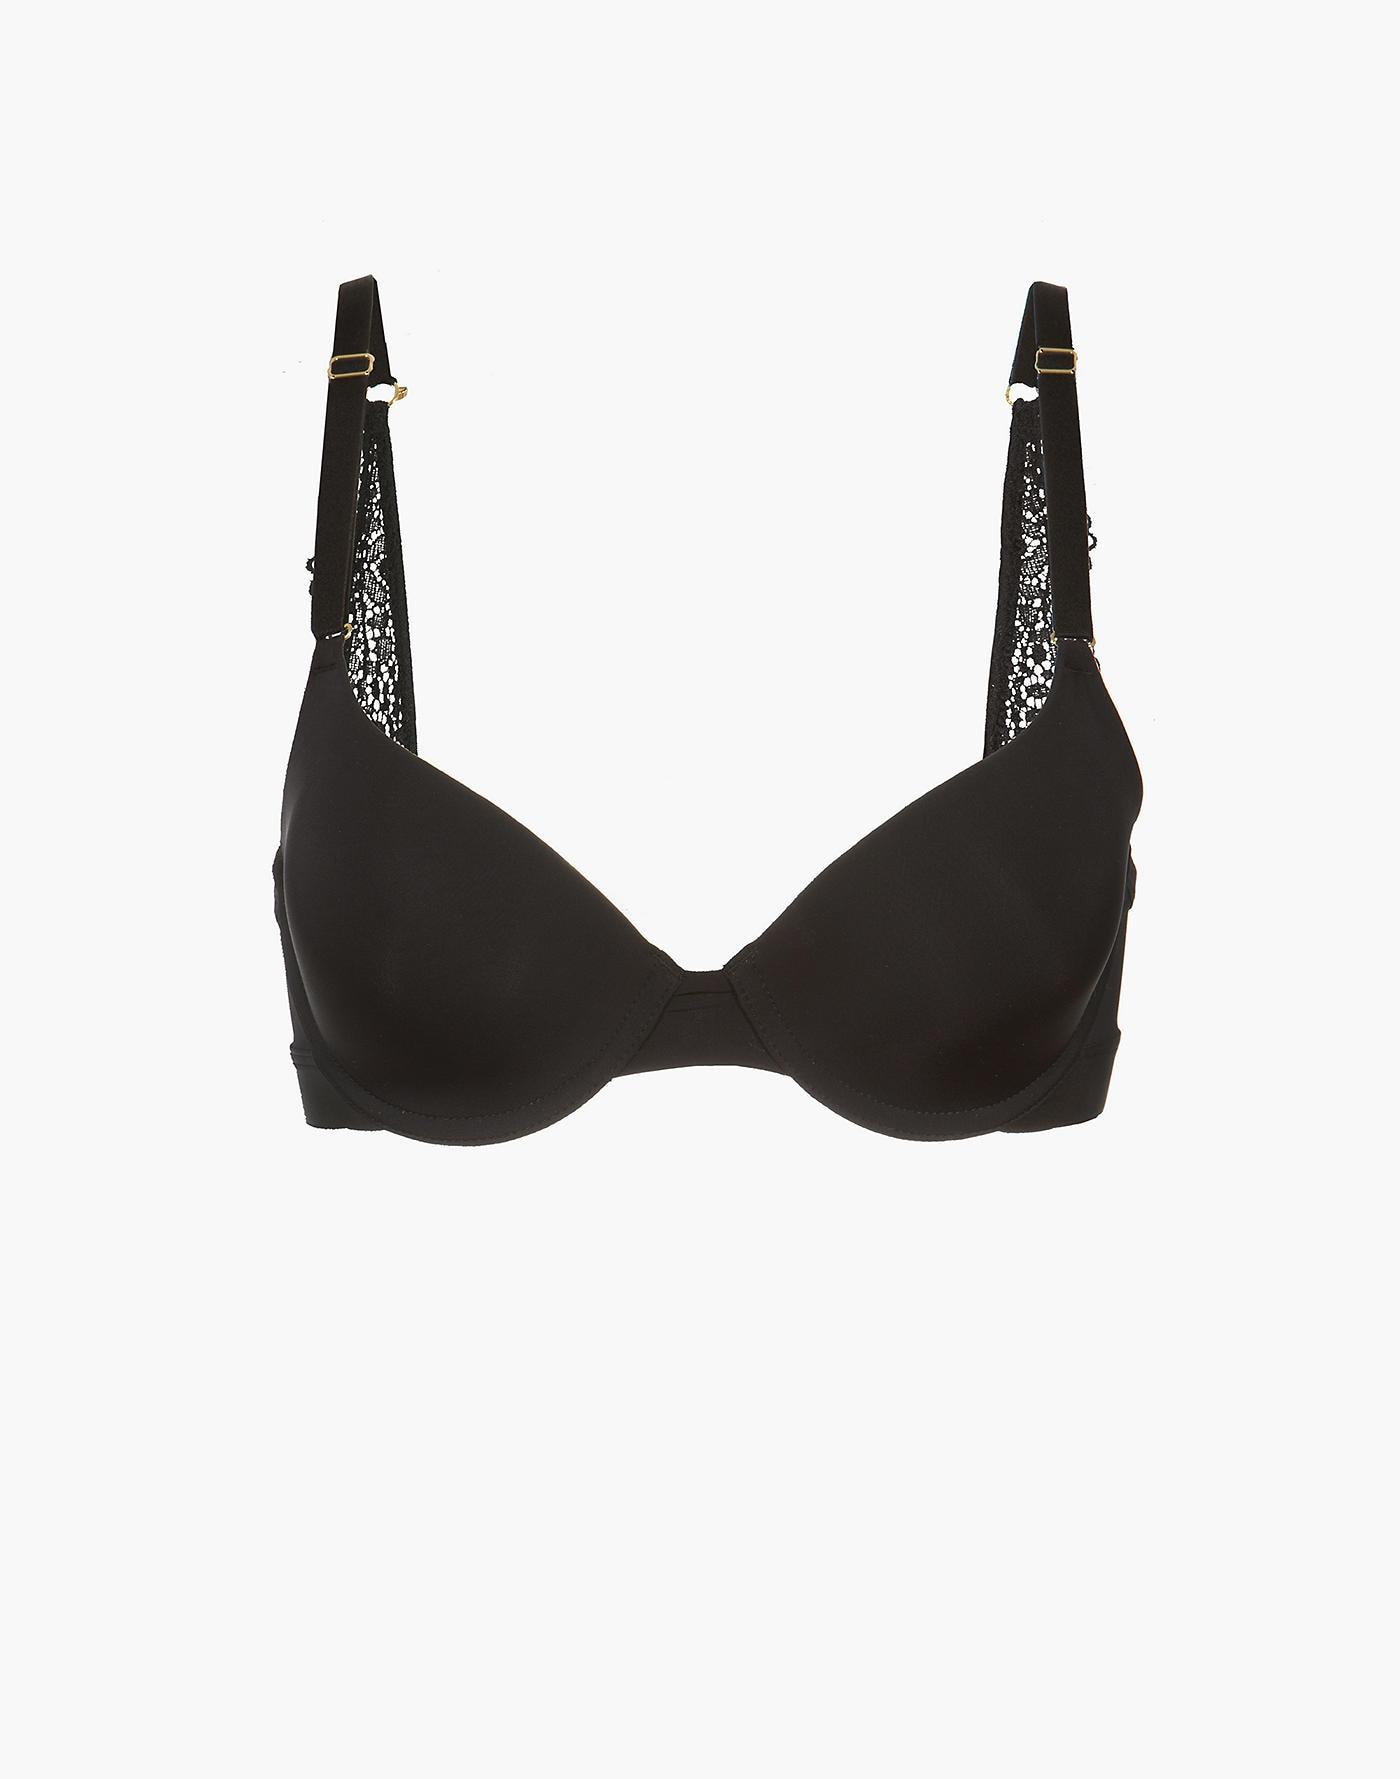 Madewell Synthetic Lively™ T-shirt Bra in Black - Lyst